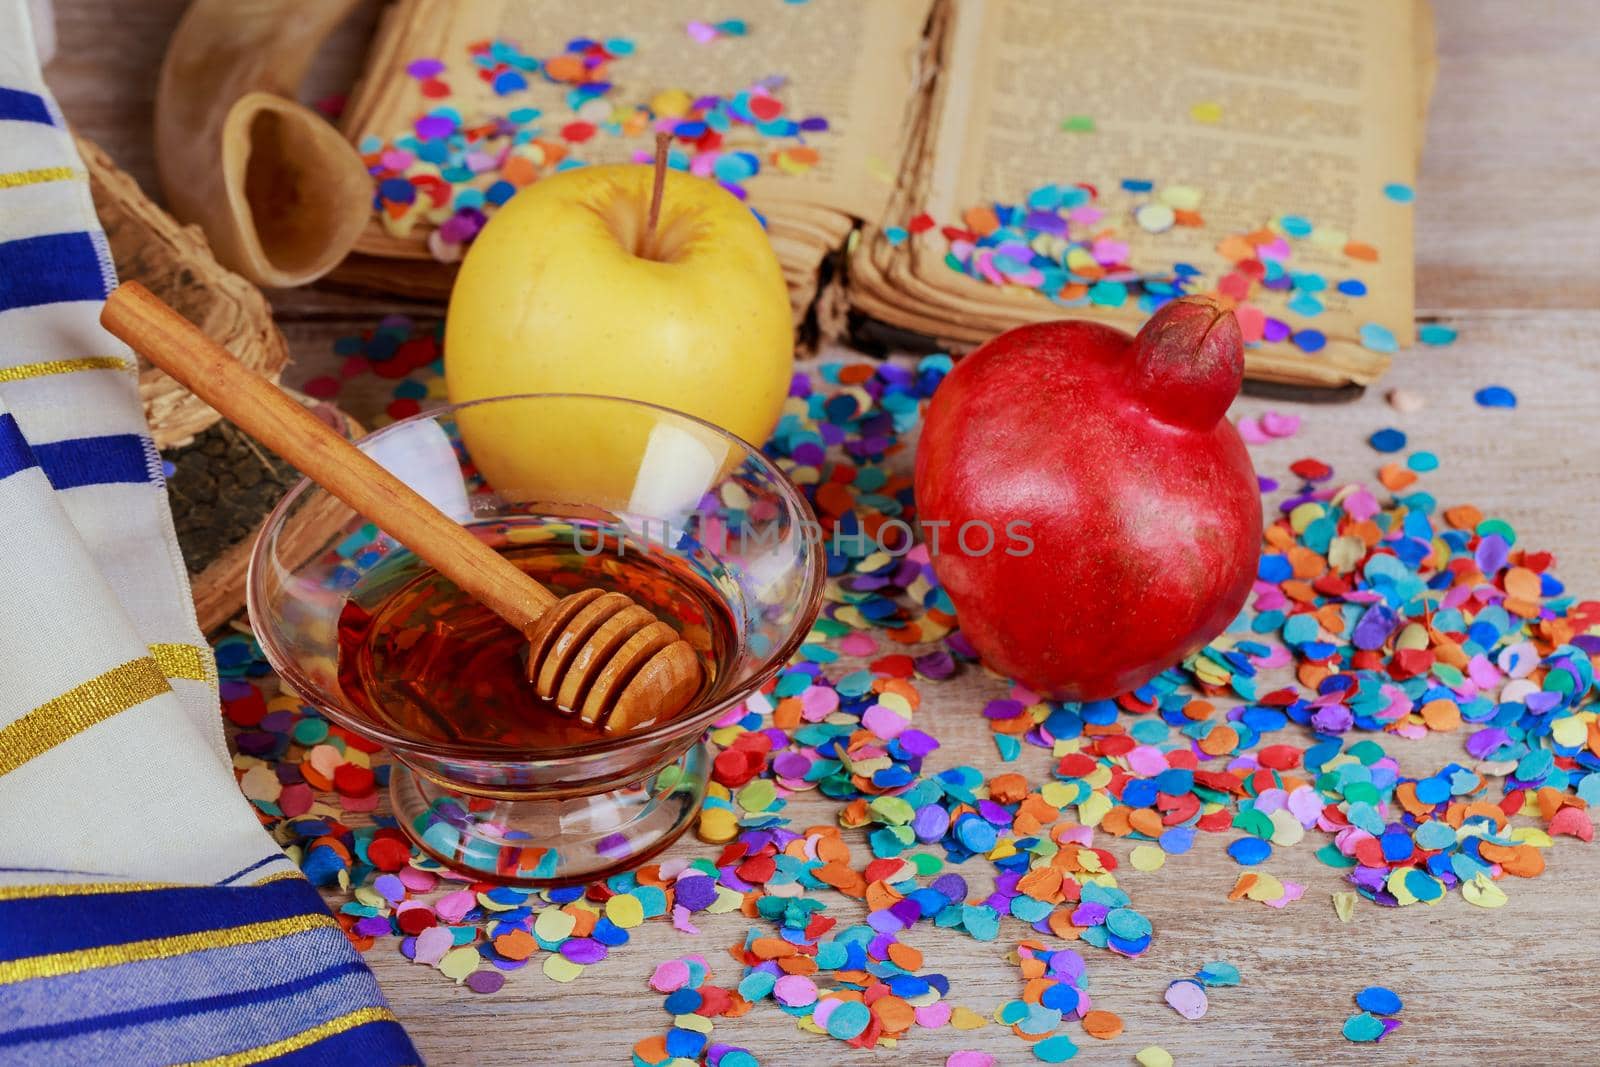 On the table in the Jewish New Year Holiday Rosh Hashanah celebration